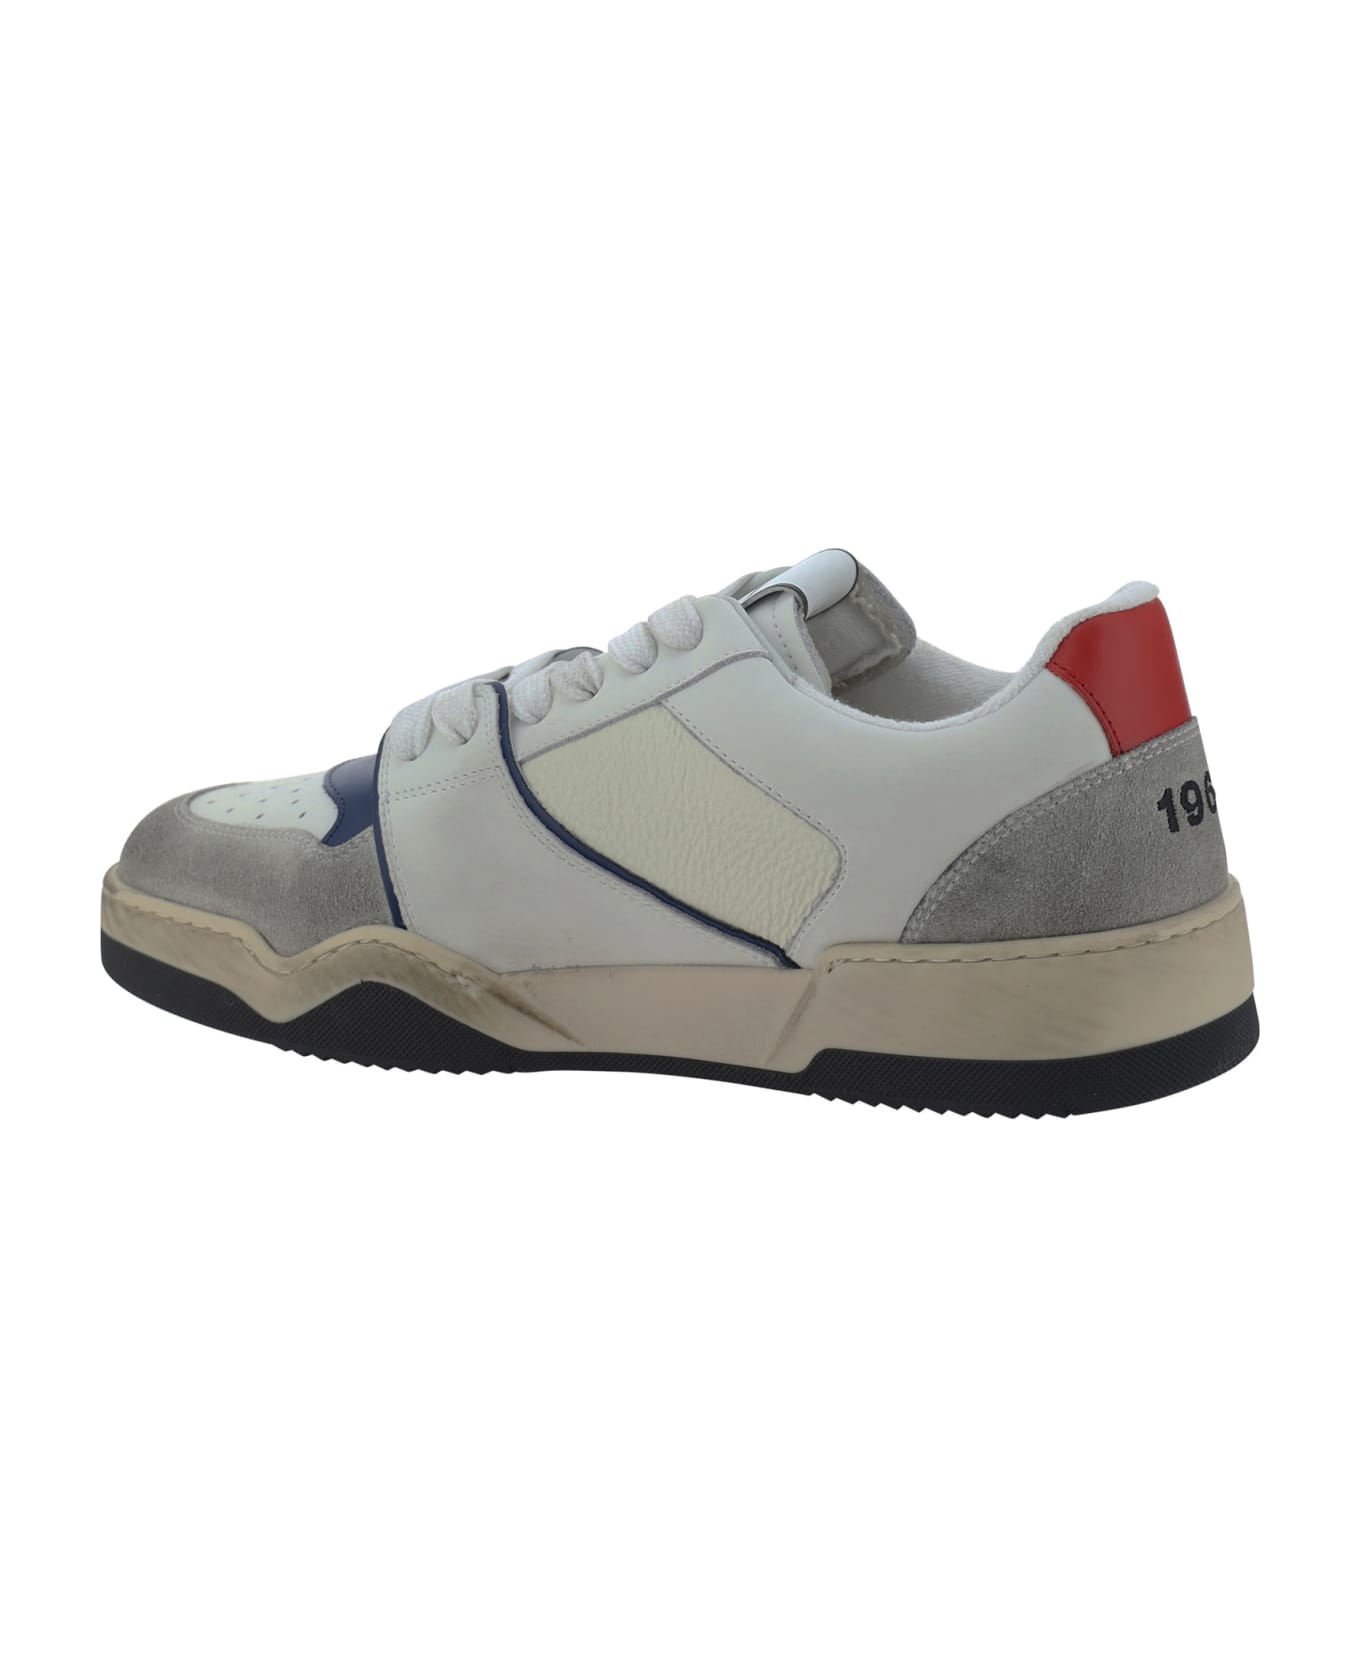 Dsquared2 Sneakers - Bianco+blu+rosso スニーカー